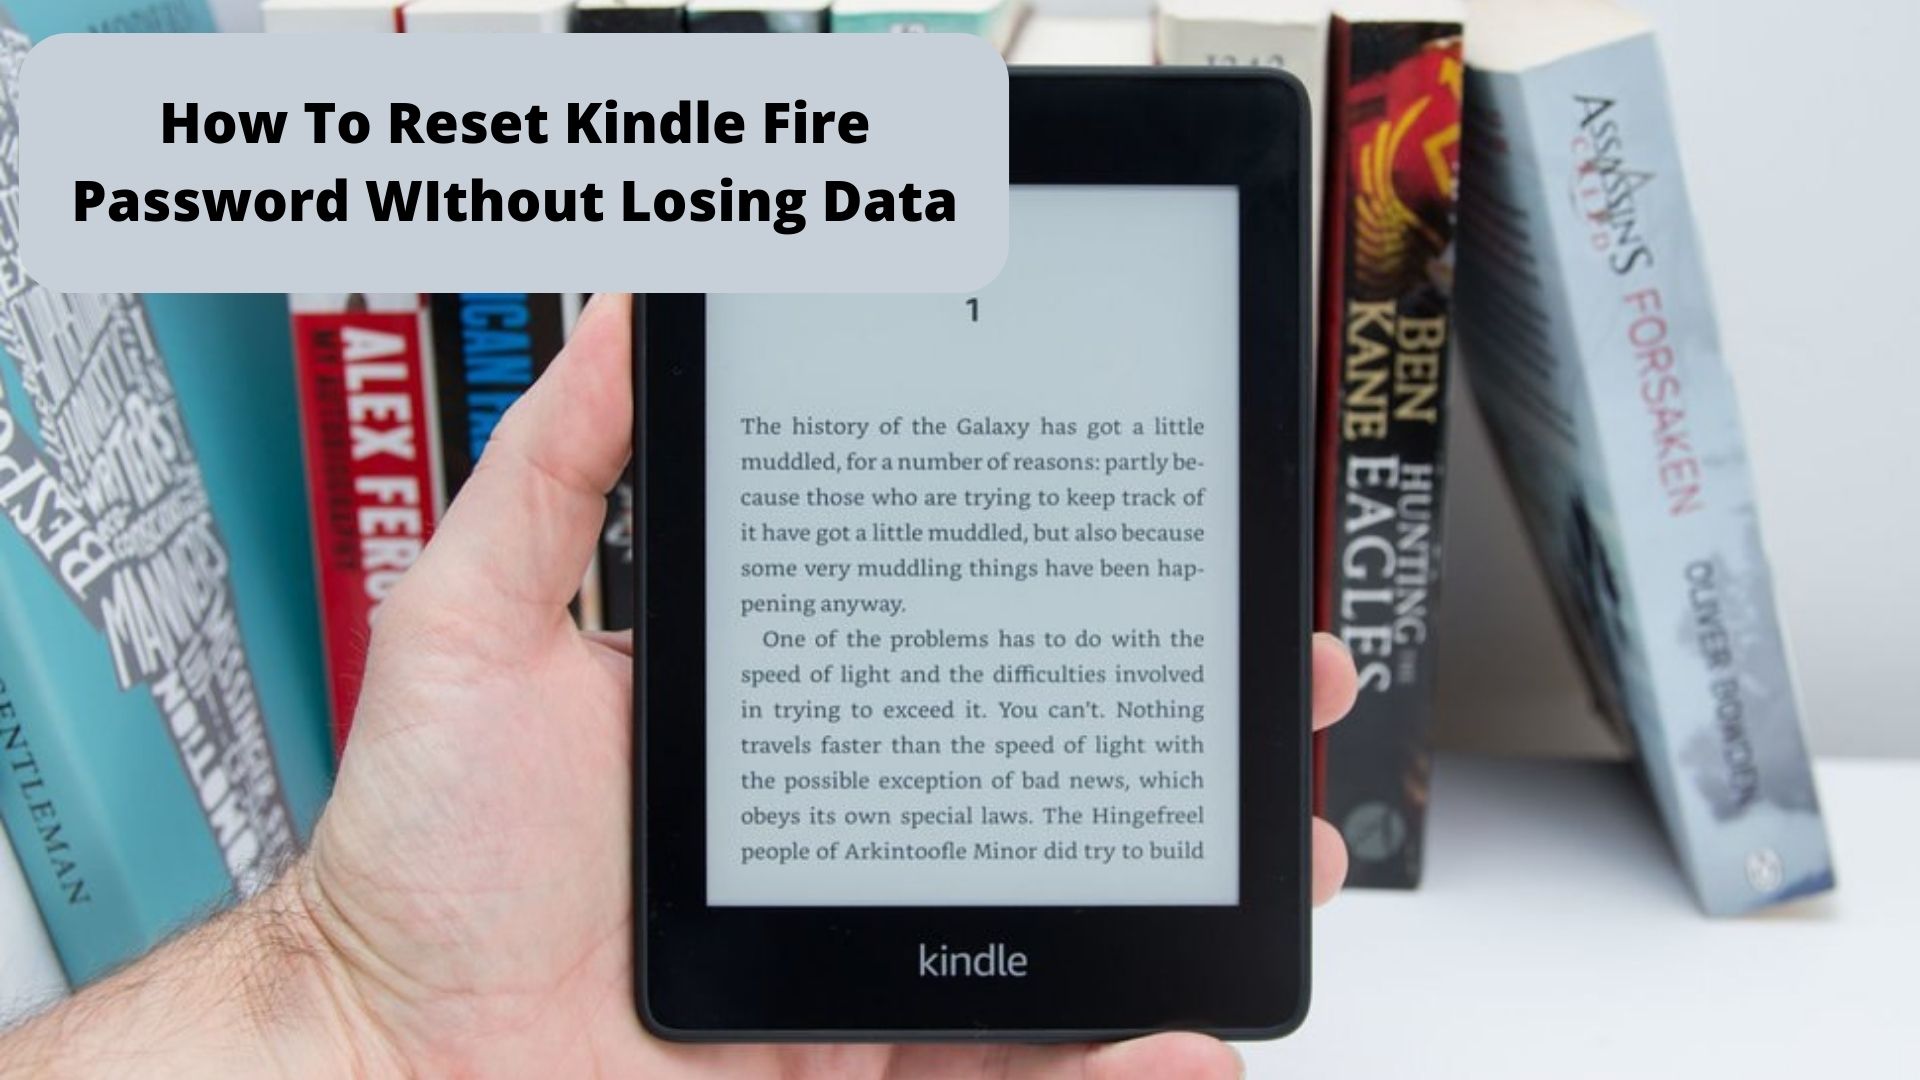 How To Reset Kindle Fire Password Without Losing Data?